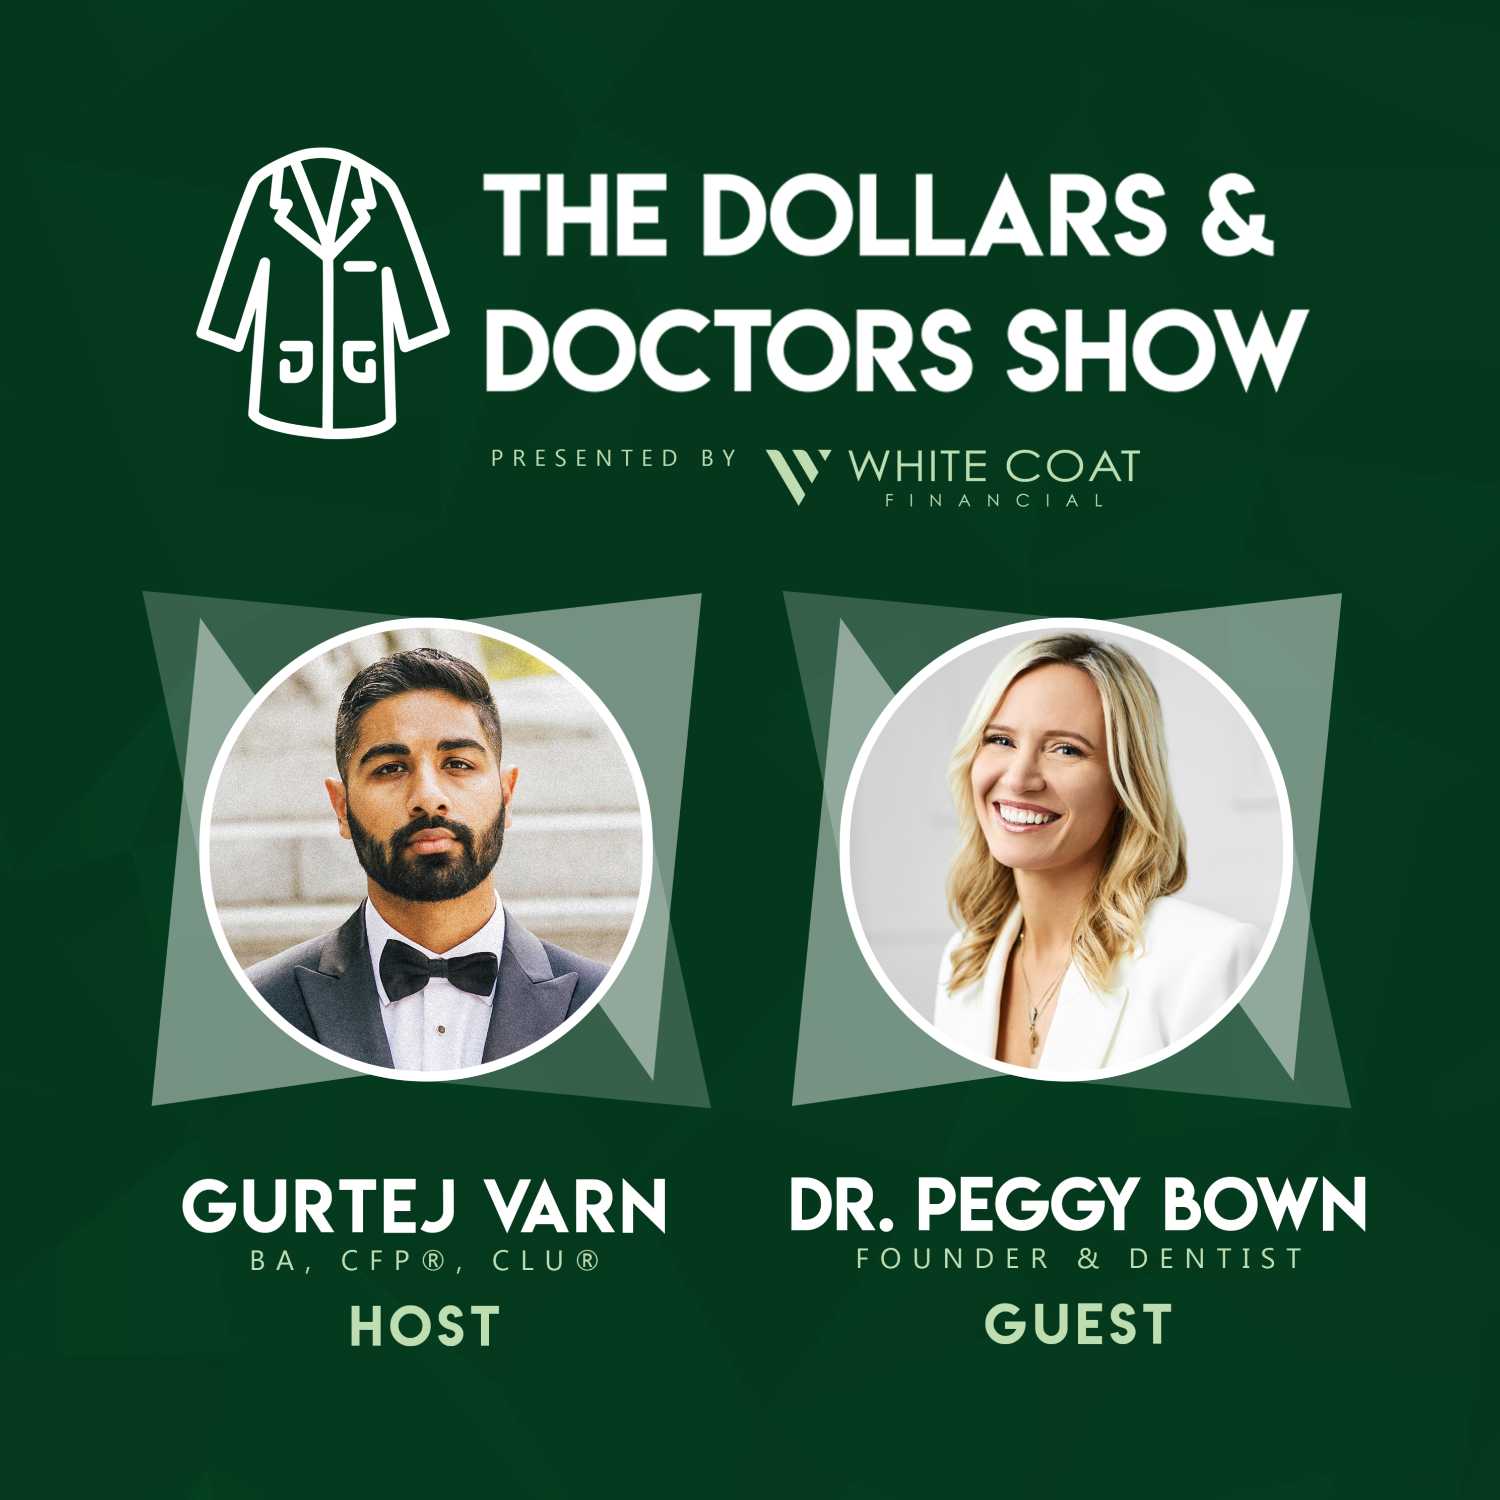 Episode 11: Dr. Peggy Bown - The Power of Social Media, Cosmetic Dentistry, & Running a Digital Clinic